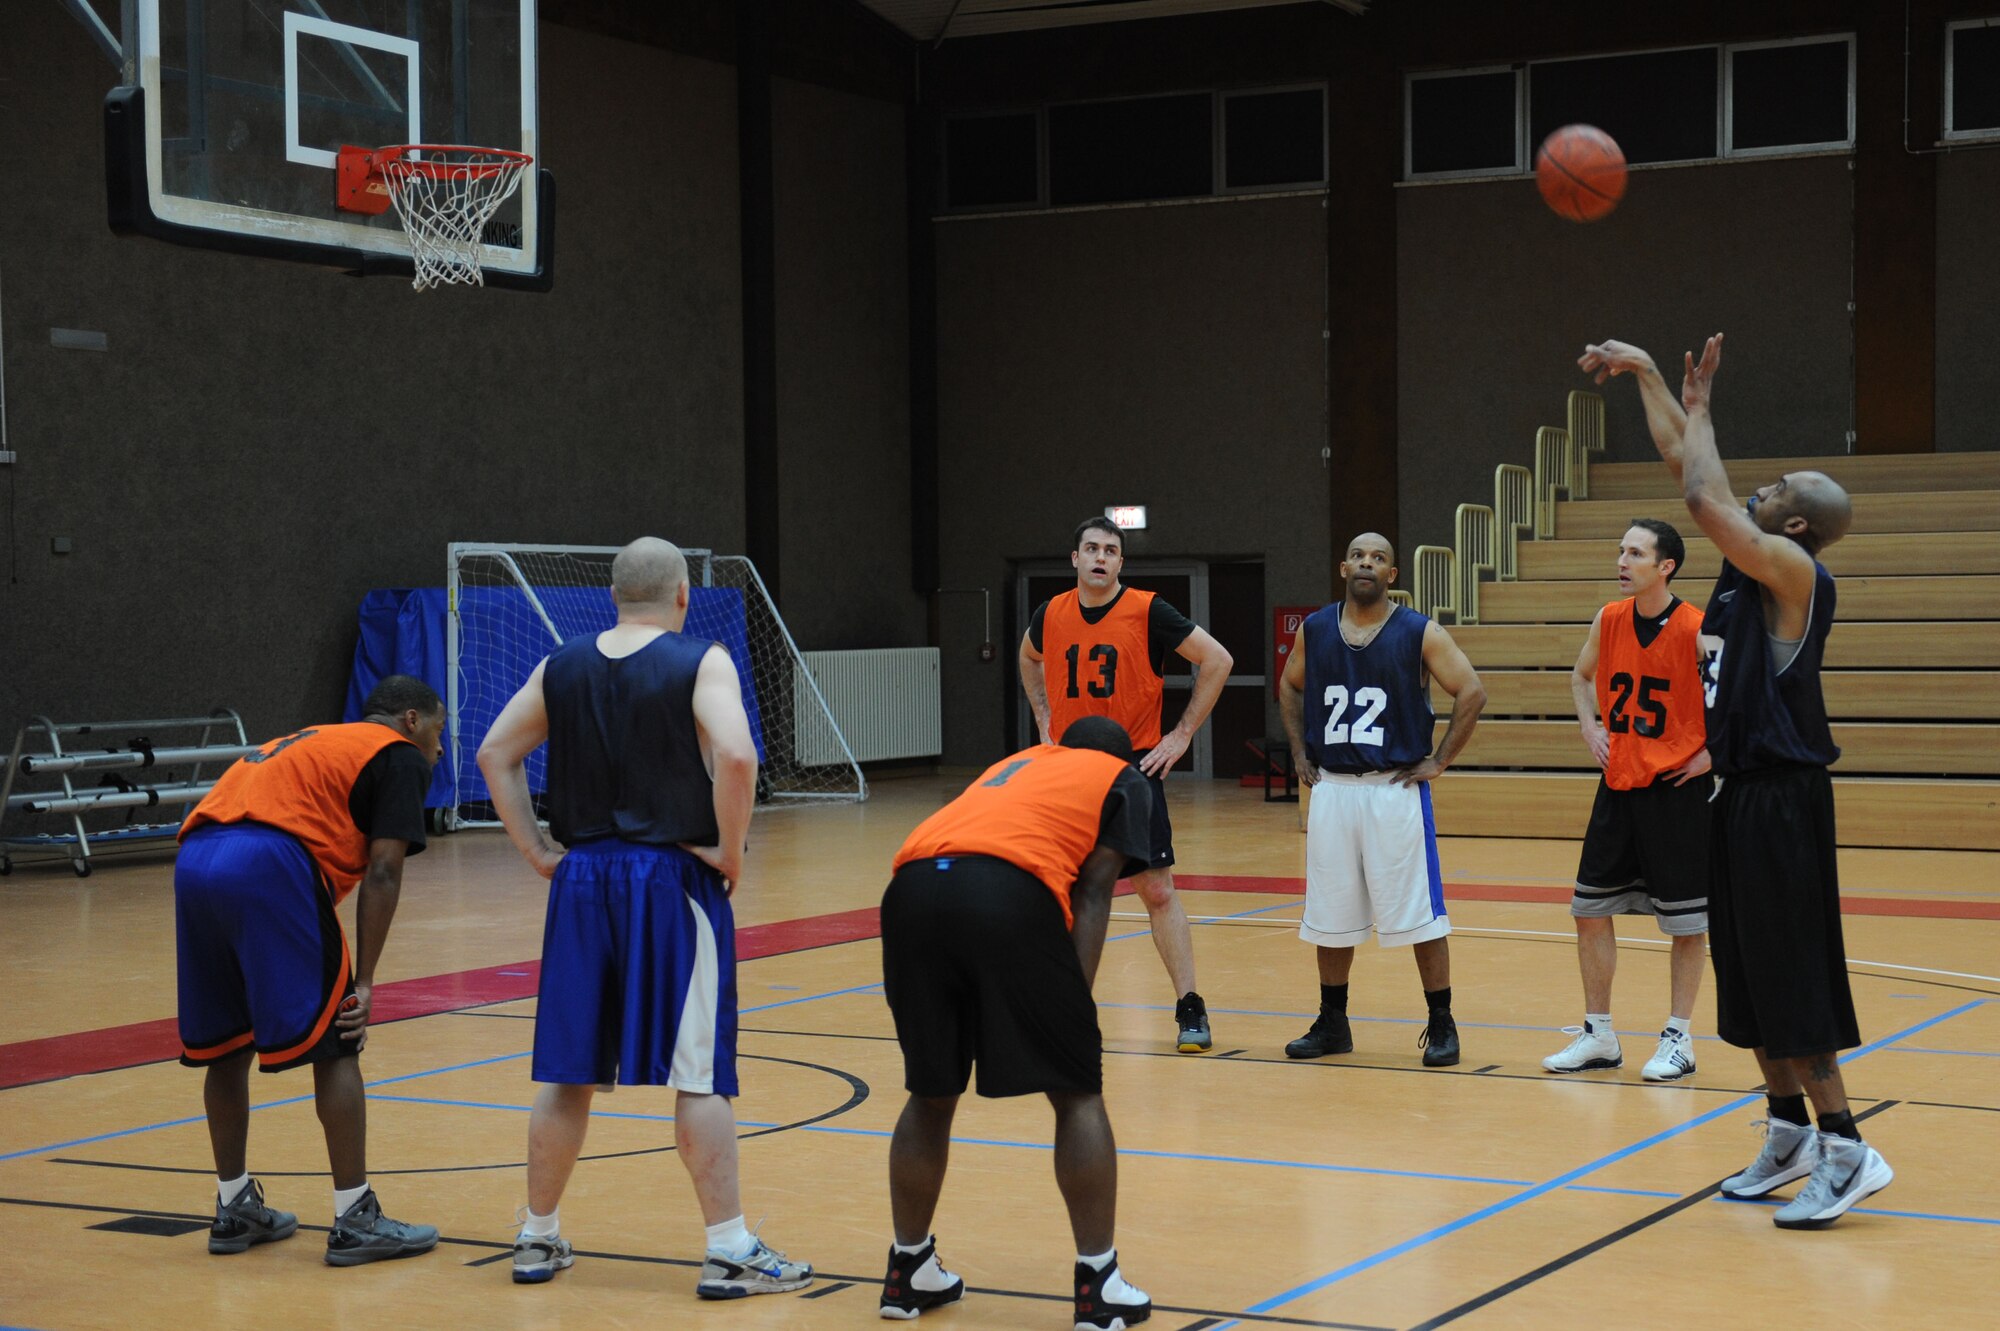 SPANGDAHLEM AIR BASE, Germany –Tommie Albright, 726th Air Mobility Squadron, shoots a free throw during an over-30 basketball league playoff game at the Skelton Memorial Fitness Center here Feb. 7. The 726th AMS team rose to victory against the 52nd MDG with a final score of 37-27. The league championship game will take place Feb. 13 at the fitness center. (U.S. Air Force photo by Senior Airman Christopher Toon/Released)